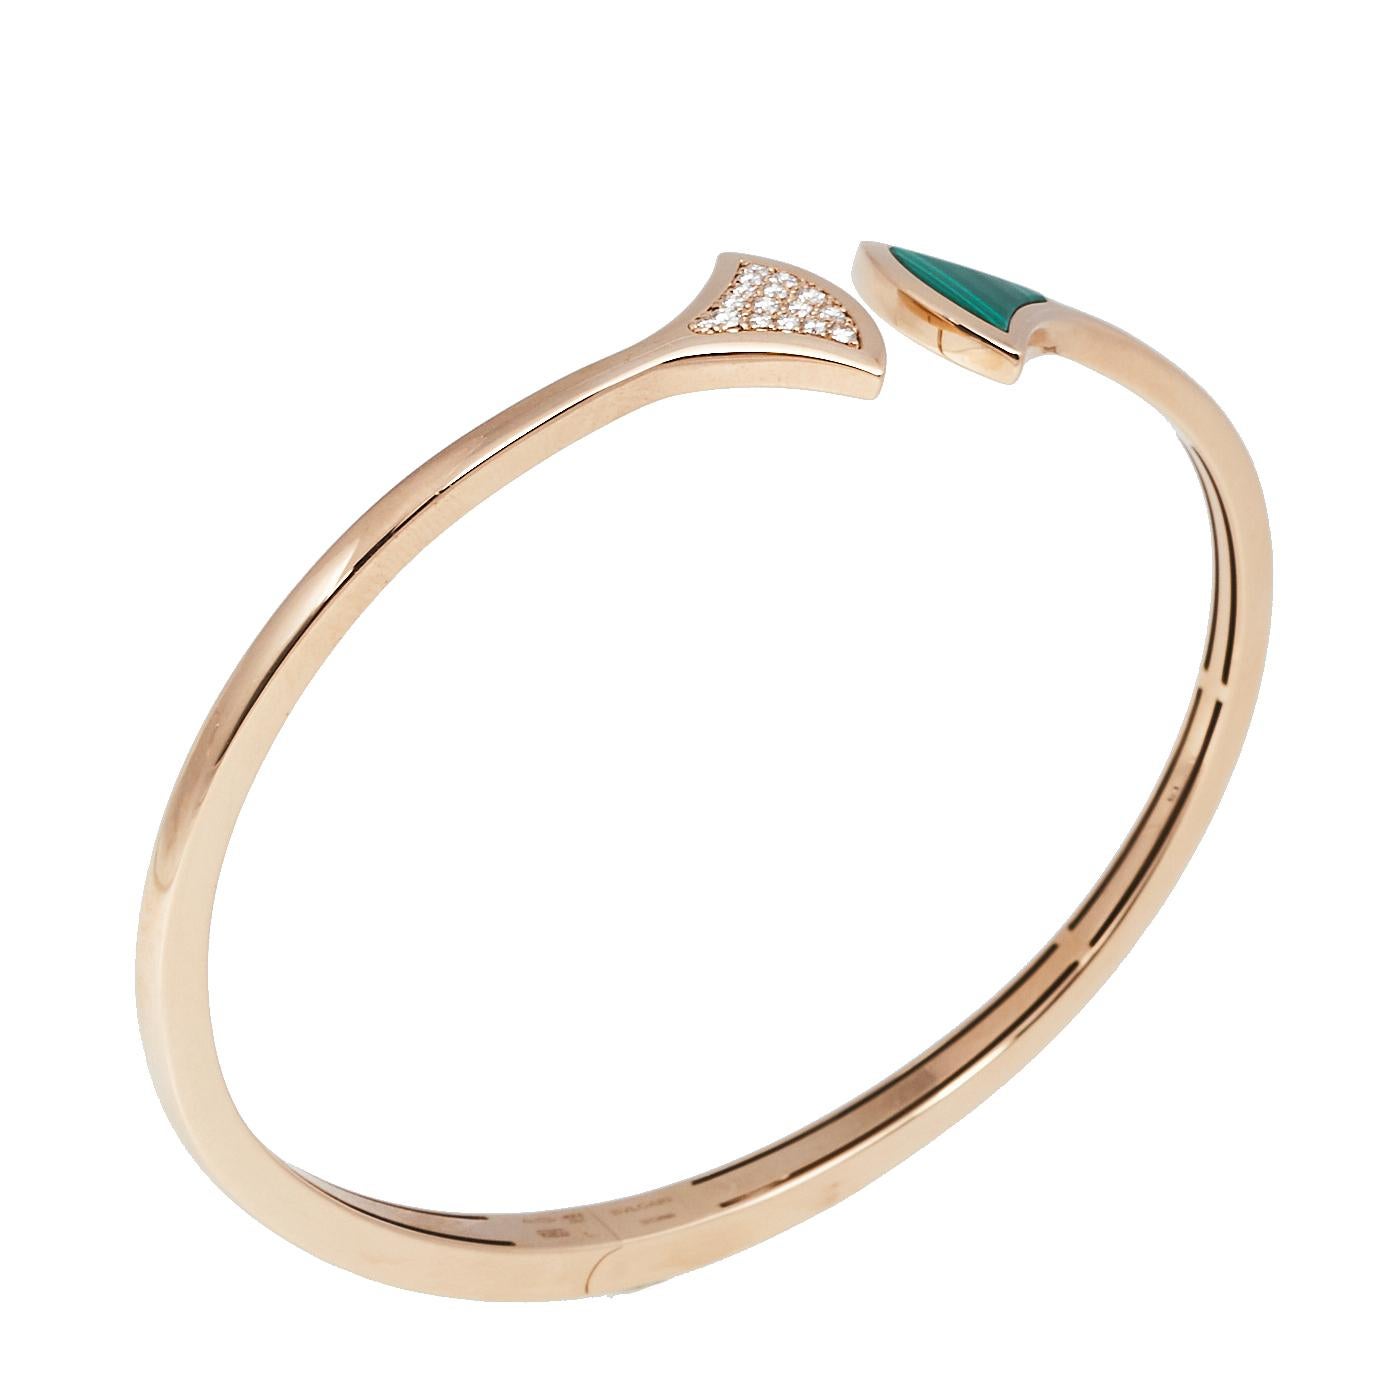 Truly meant for a diva like you, this Divas' Dream bracelet is from Bvlgari. It has been magnificently crafted from 18k rose gold and designed with fan-shaped ends, one embedded with diamonds and the other with malachite. The piece has been finely